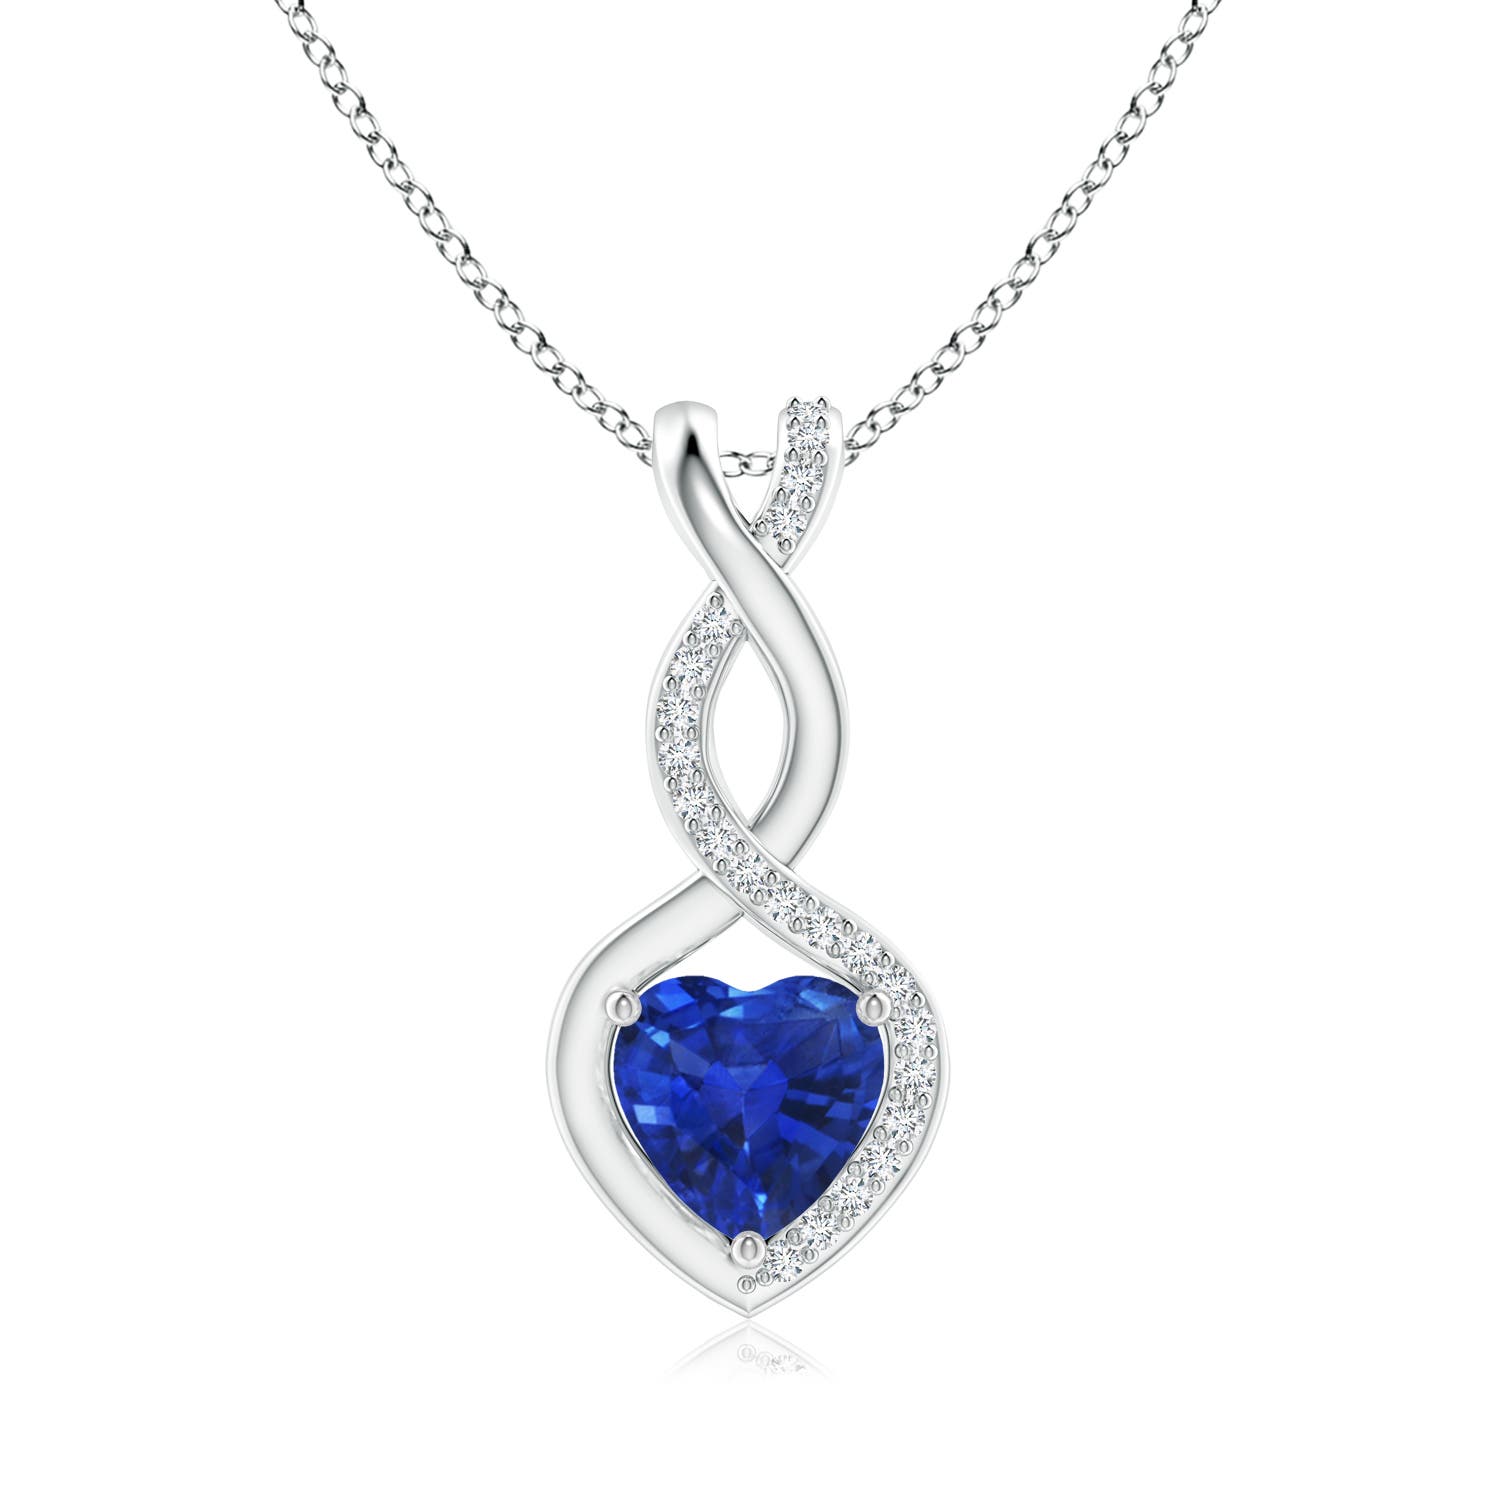 AAA - Blue Sapphire / 0.94 CT / 14 KT White Gold